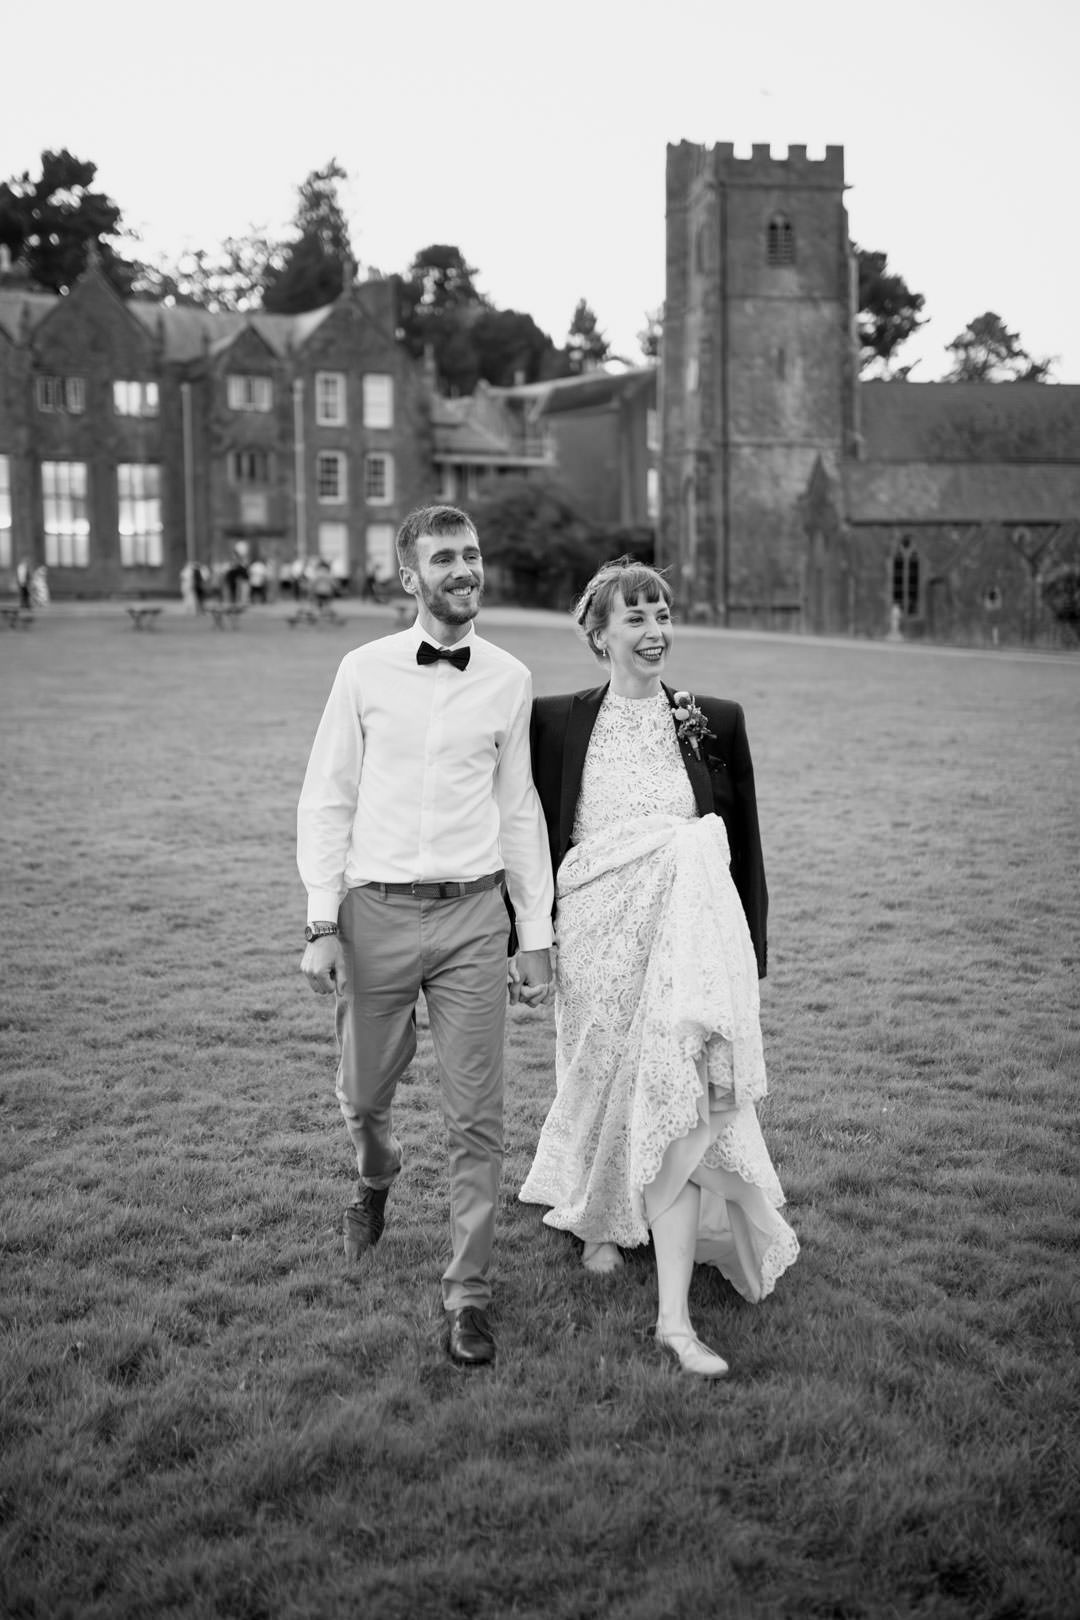 bride and groom walking hand in hand on lawn outside large manor house